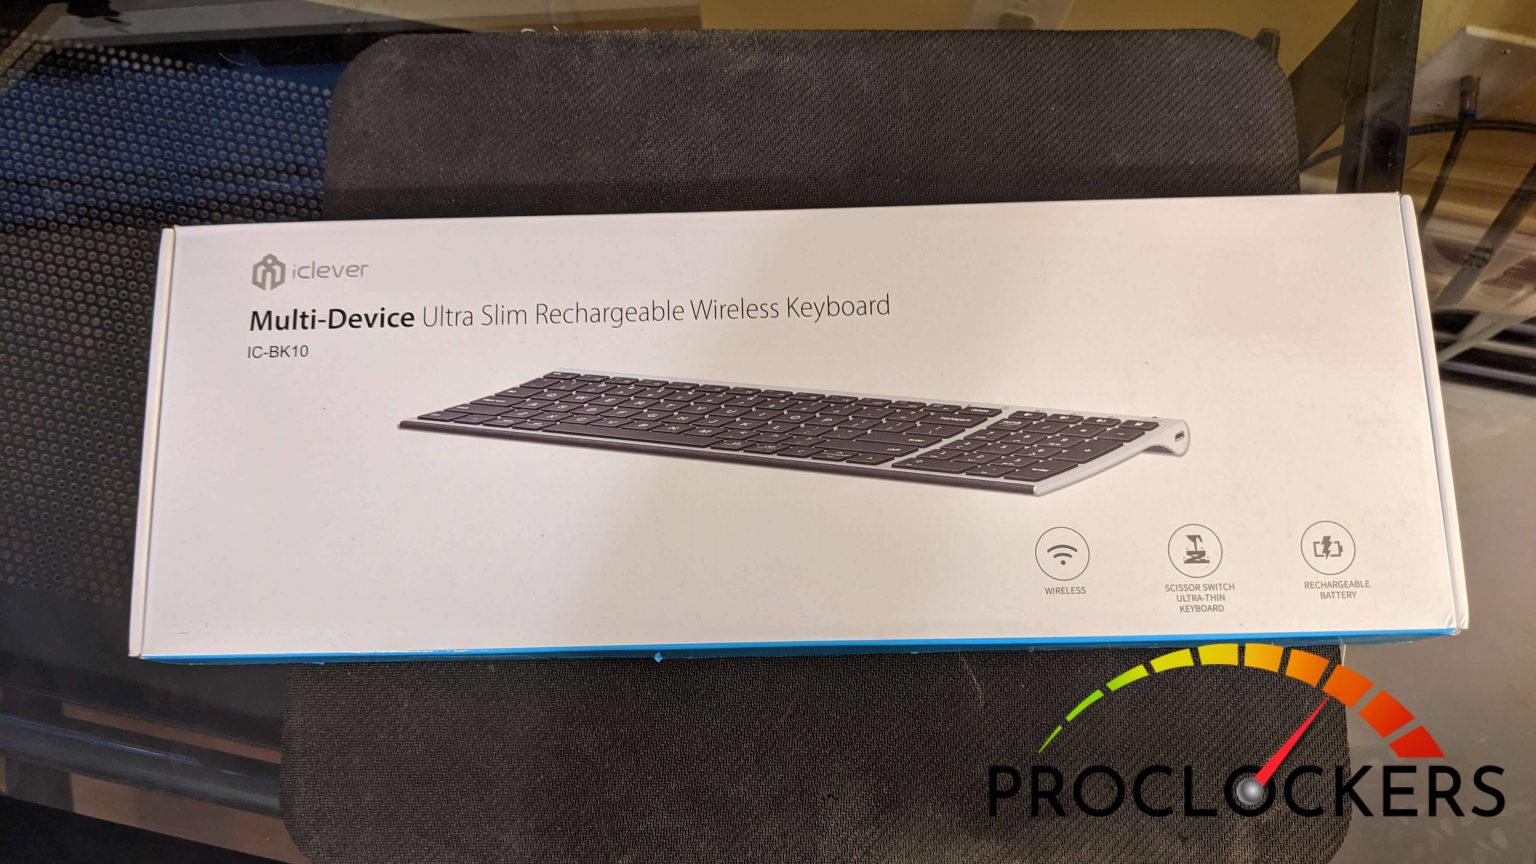 iClever BK10 Wireless Keyboard Review | PROCLOCKERS